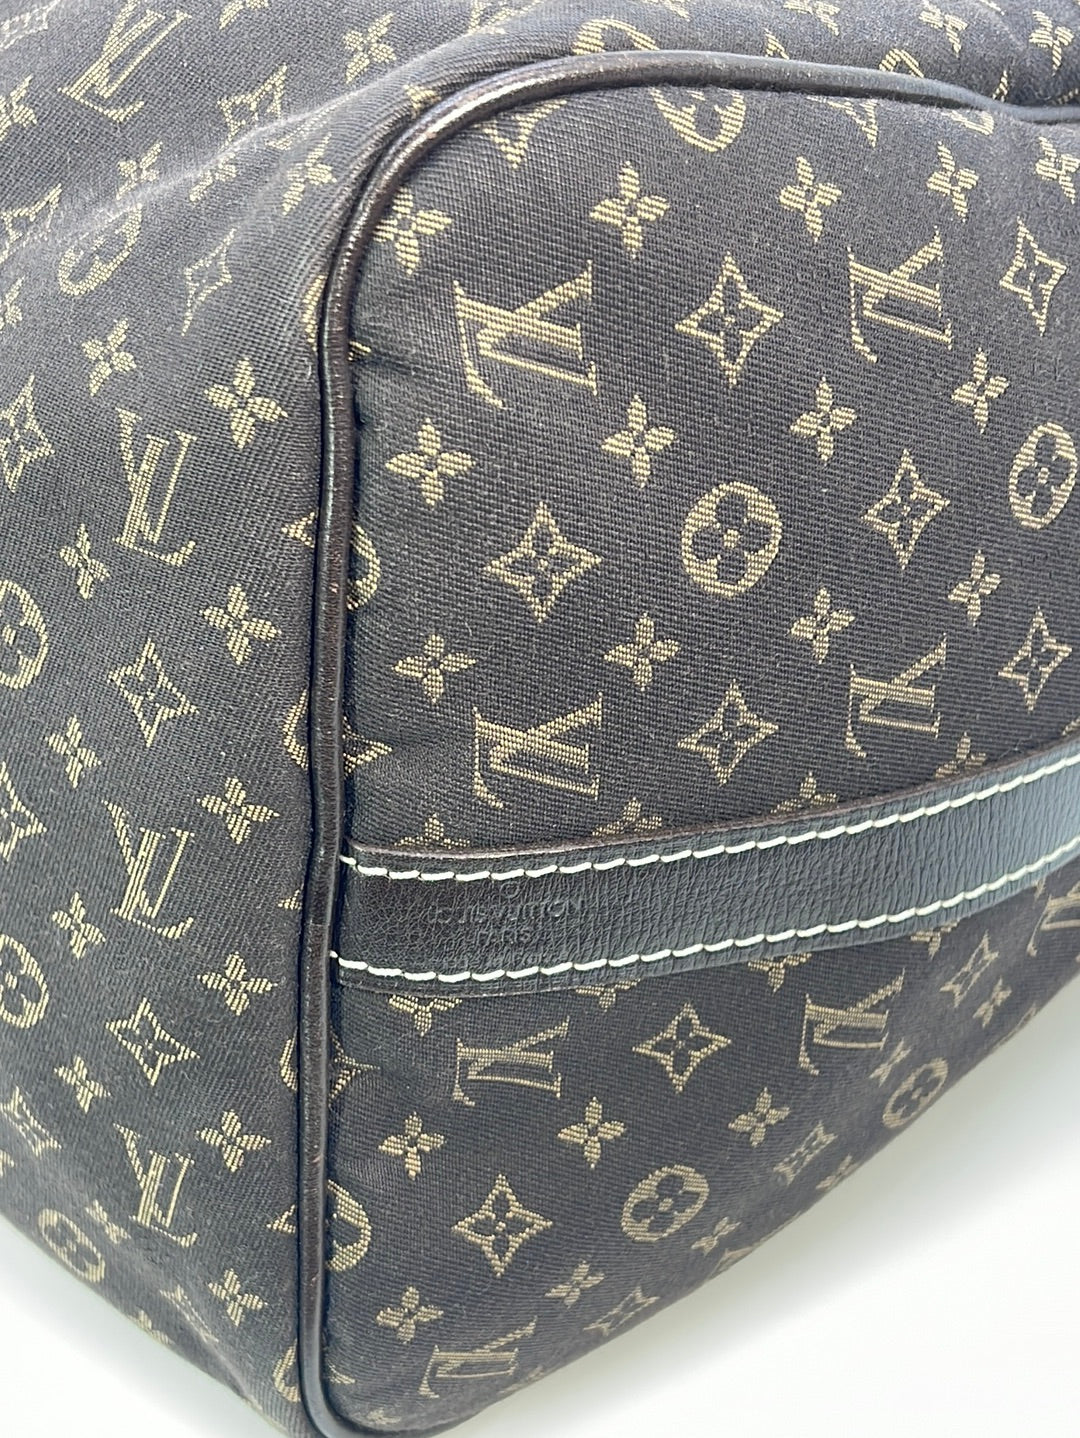 How To Clean Louis Vuitton Bag In 5 Minutes! (NEVERFULL